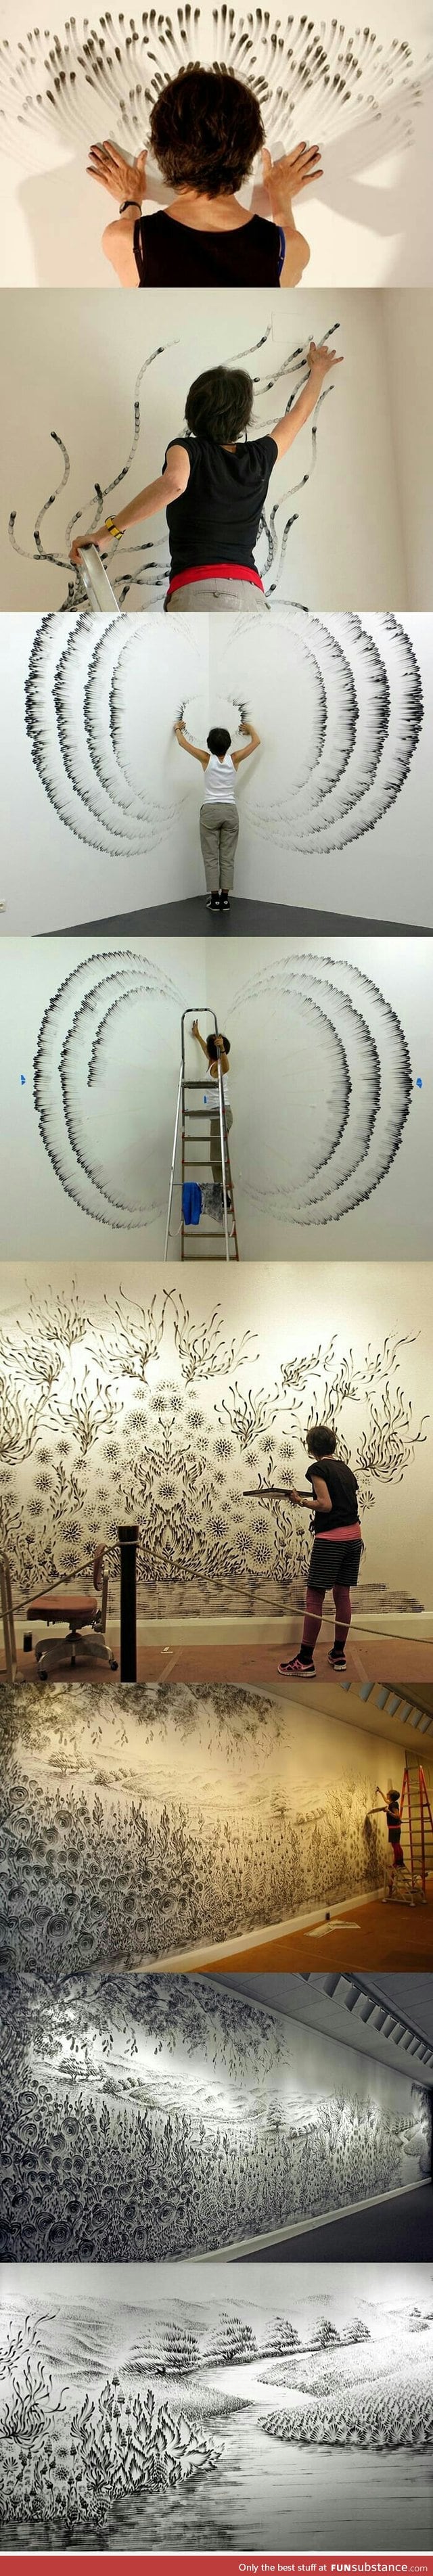 Taking finger painting to a whole new level.